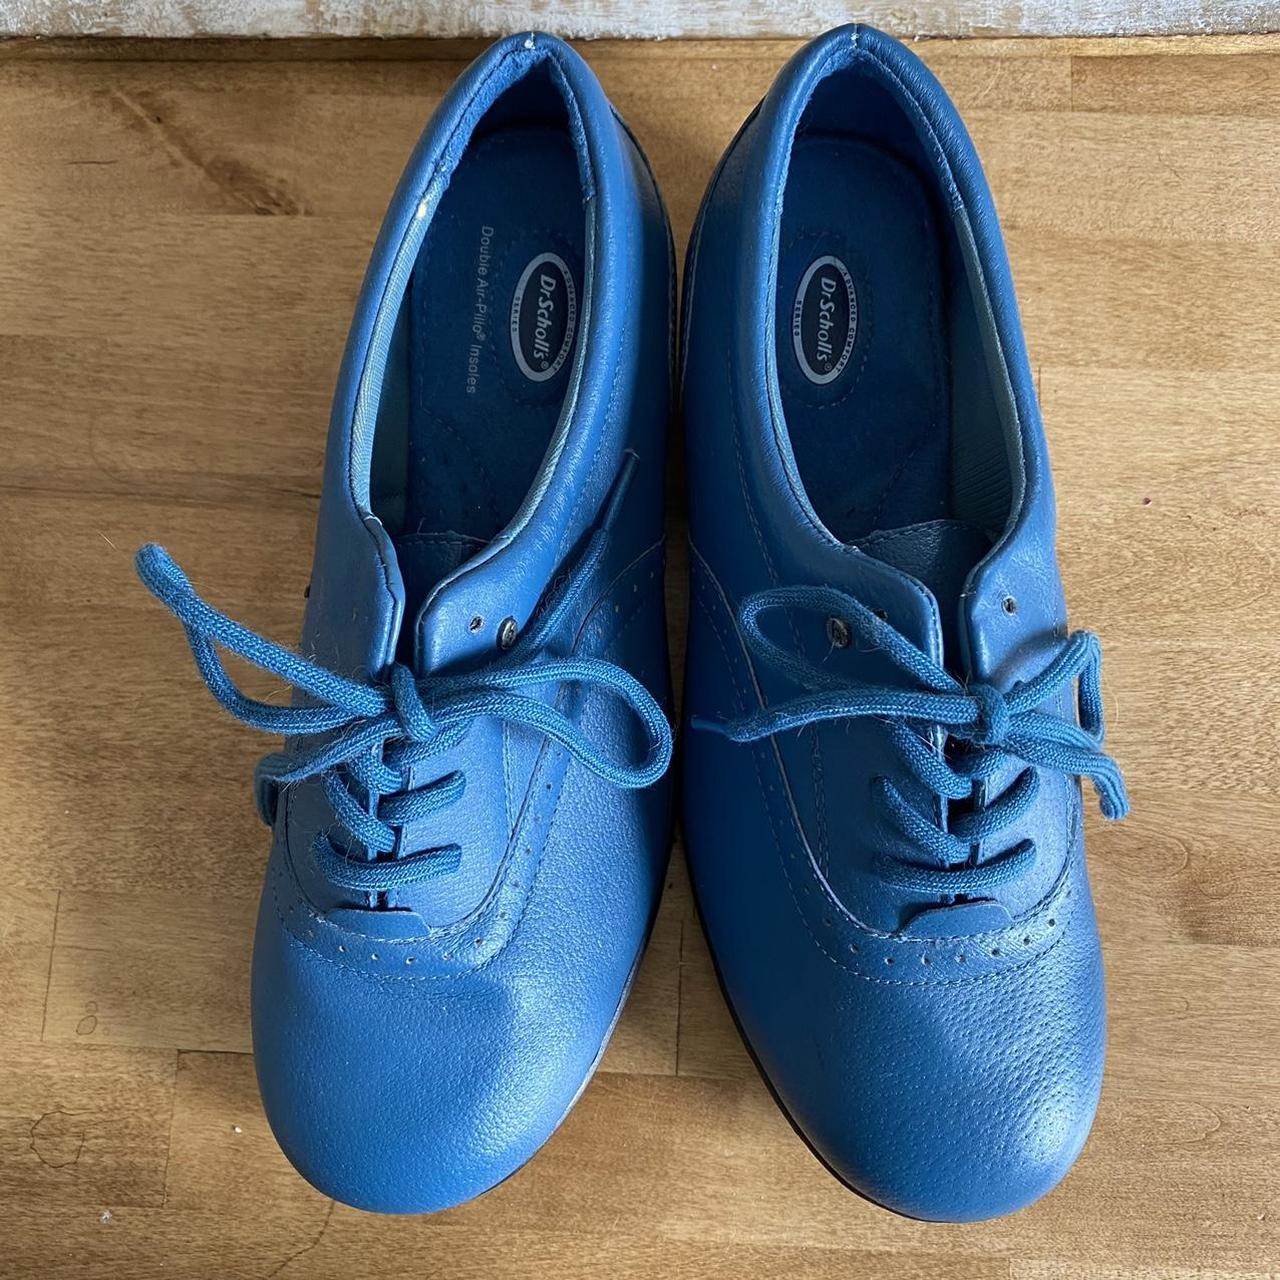 Dr Scholl's Teal Leather Lace up Oxford Shoes A... - Depop